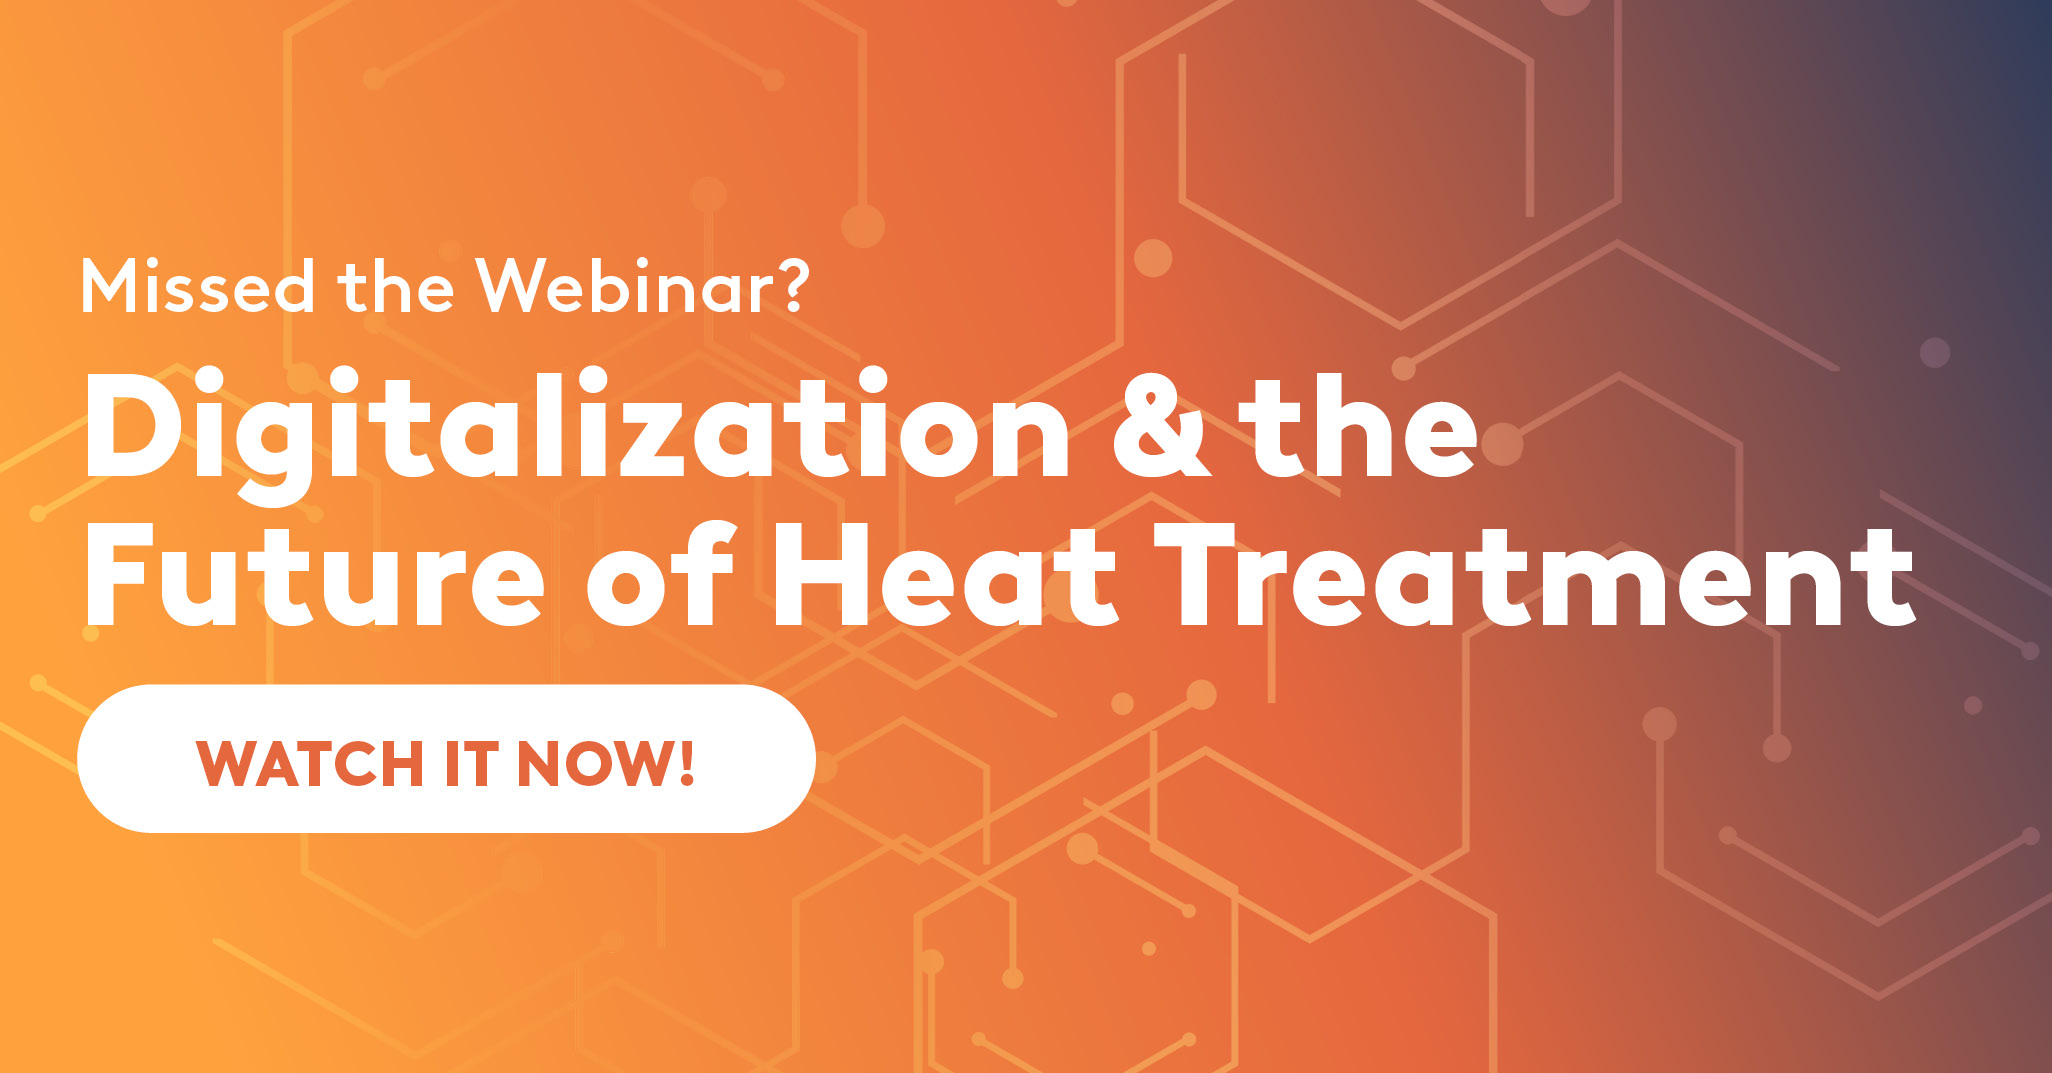 Webinar Recording Now Available: A Holistic Approach to Digital Transformation: QMULUS and the Future of Heat Treatment